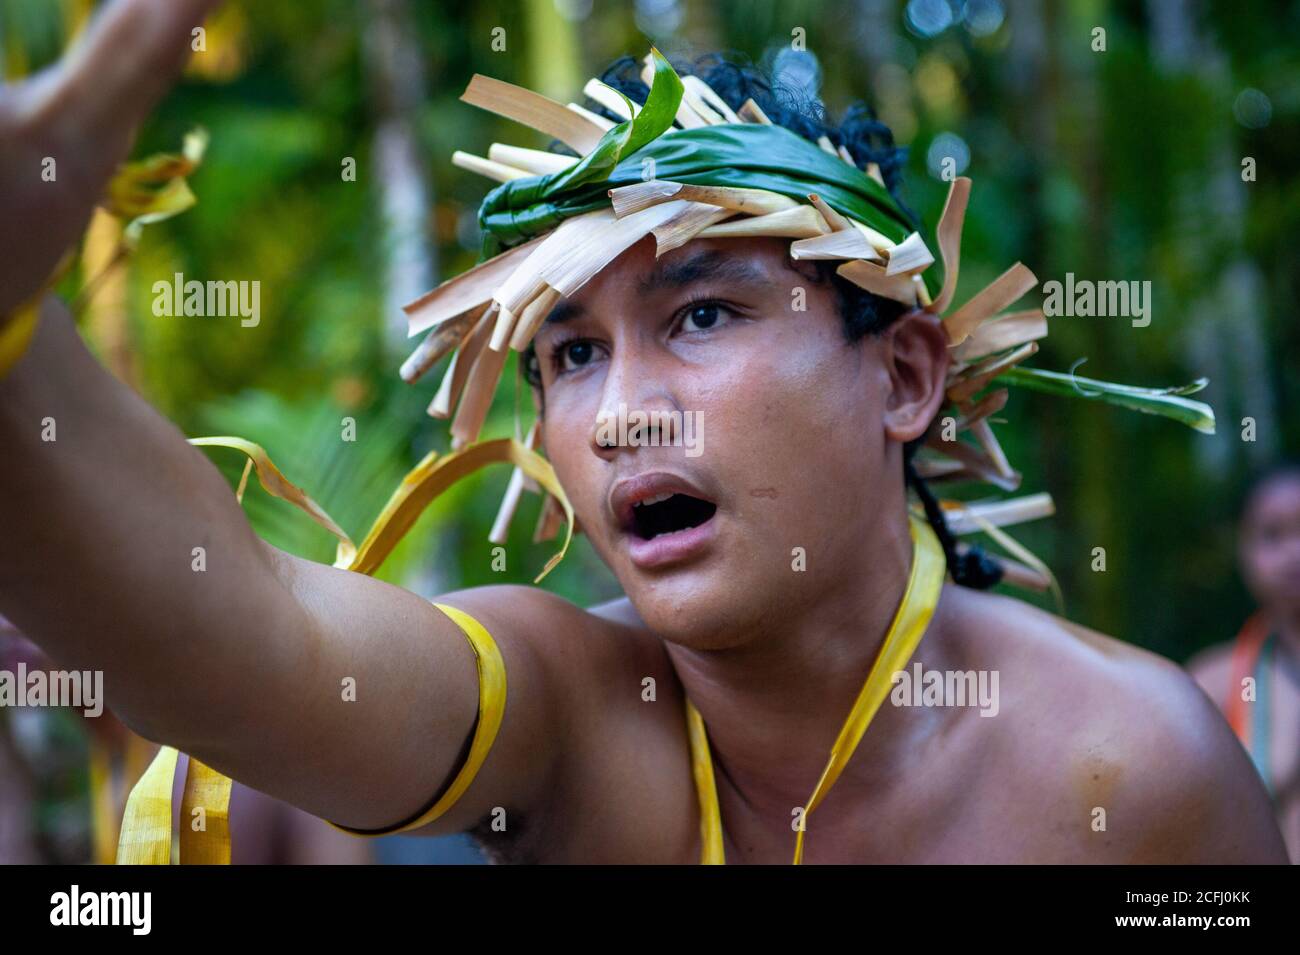 A Dancer on the The Islands of Yap Stock Photo